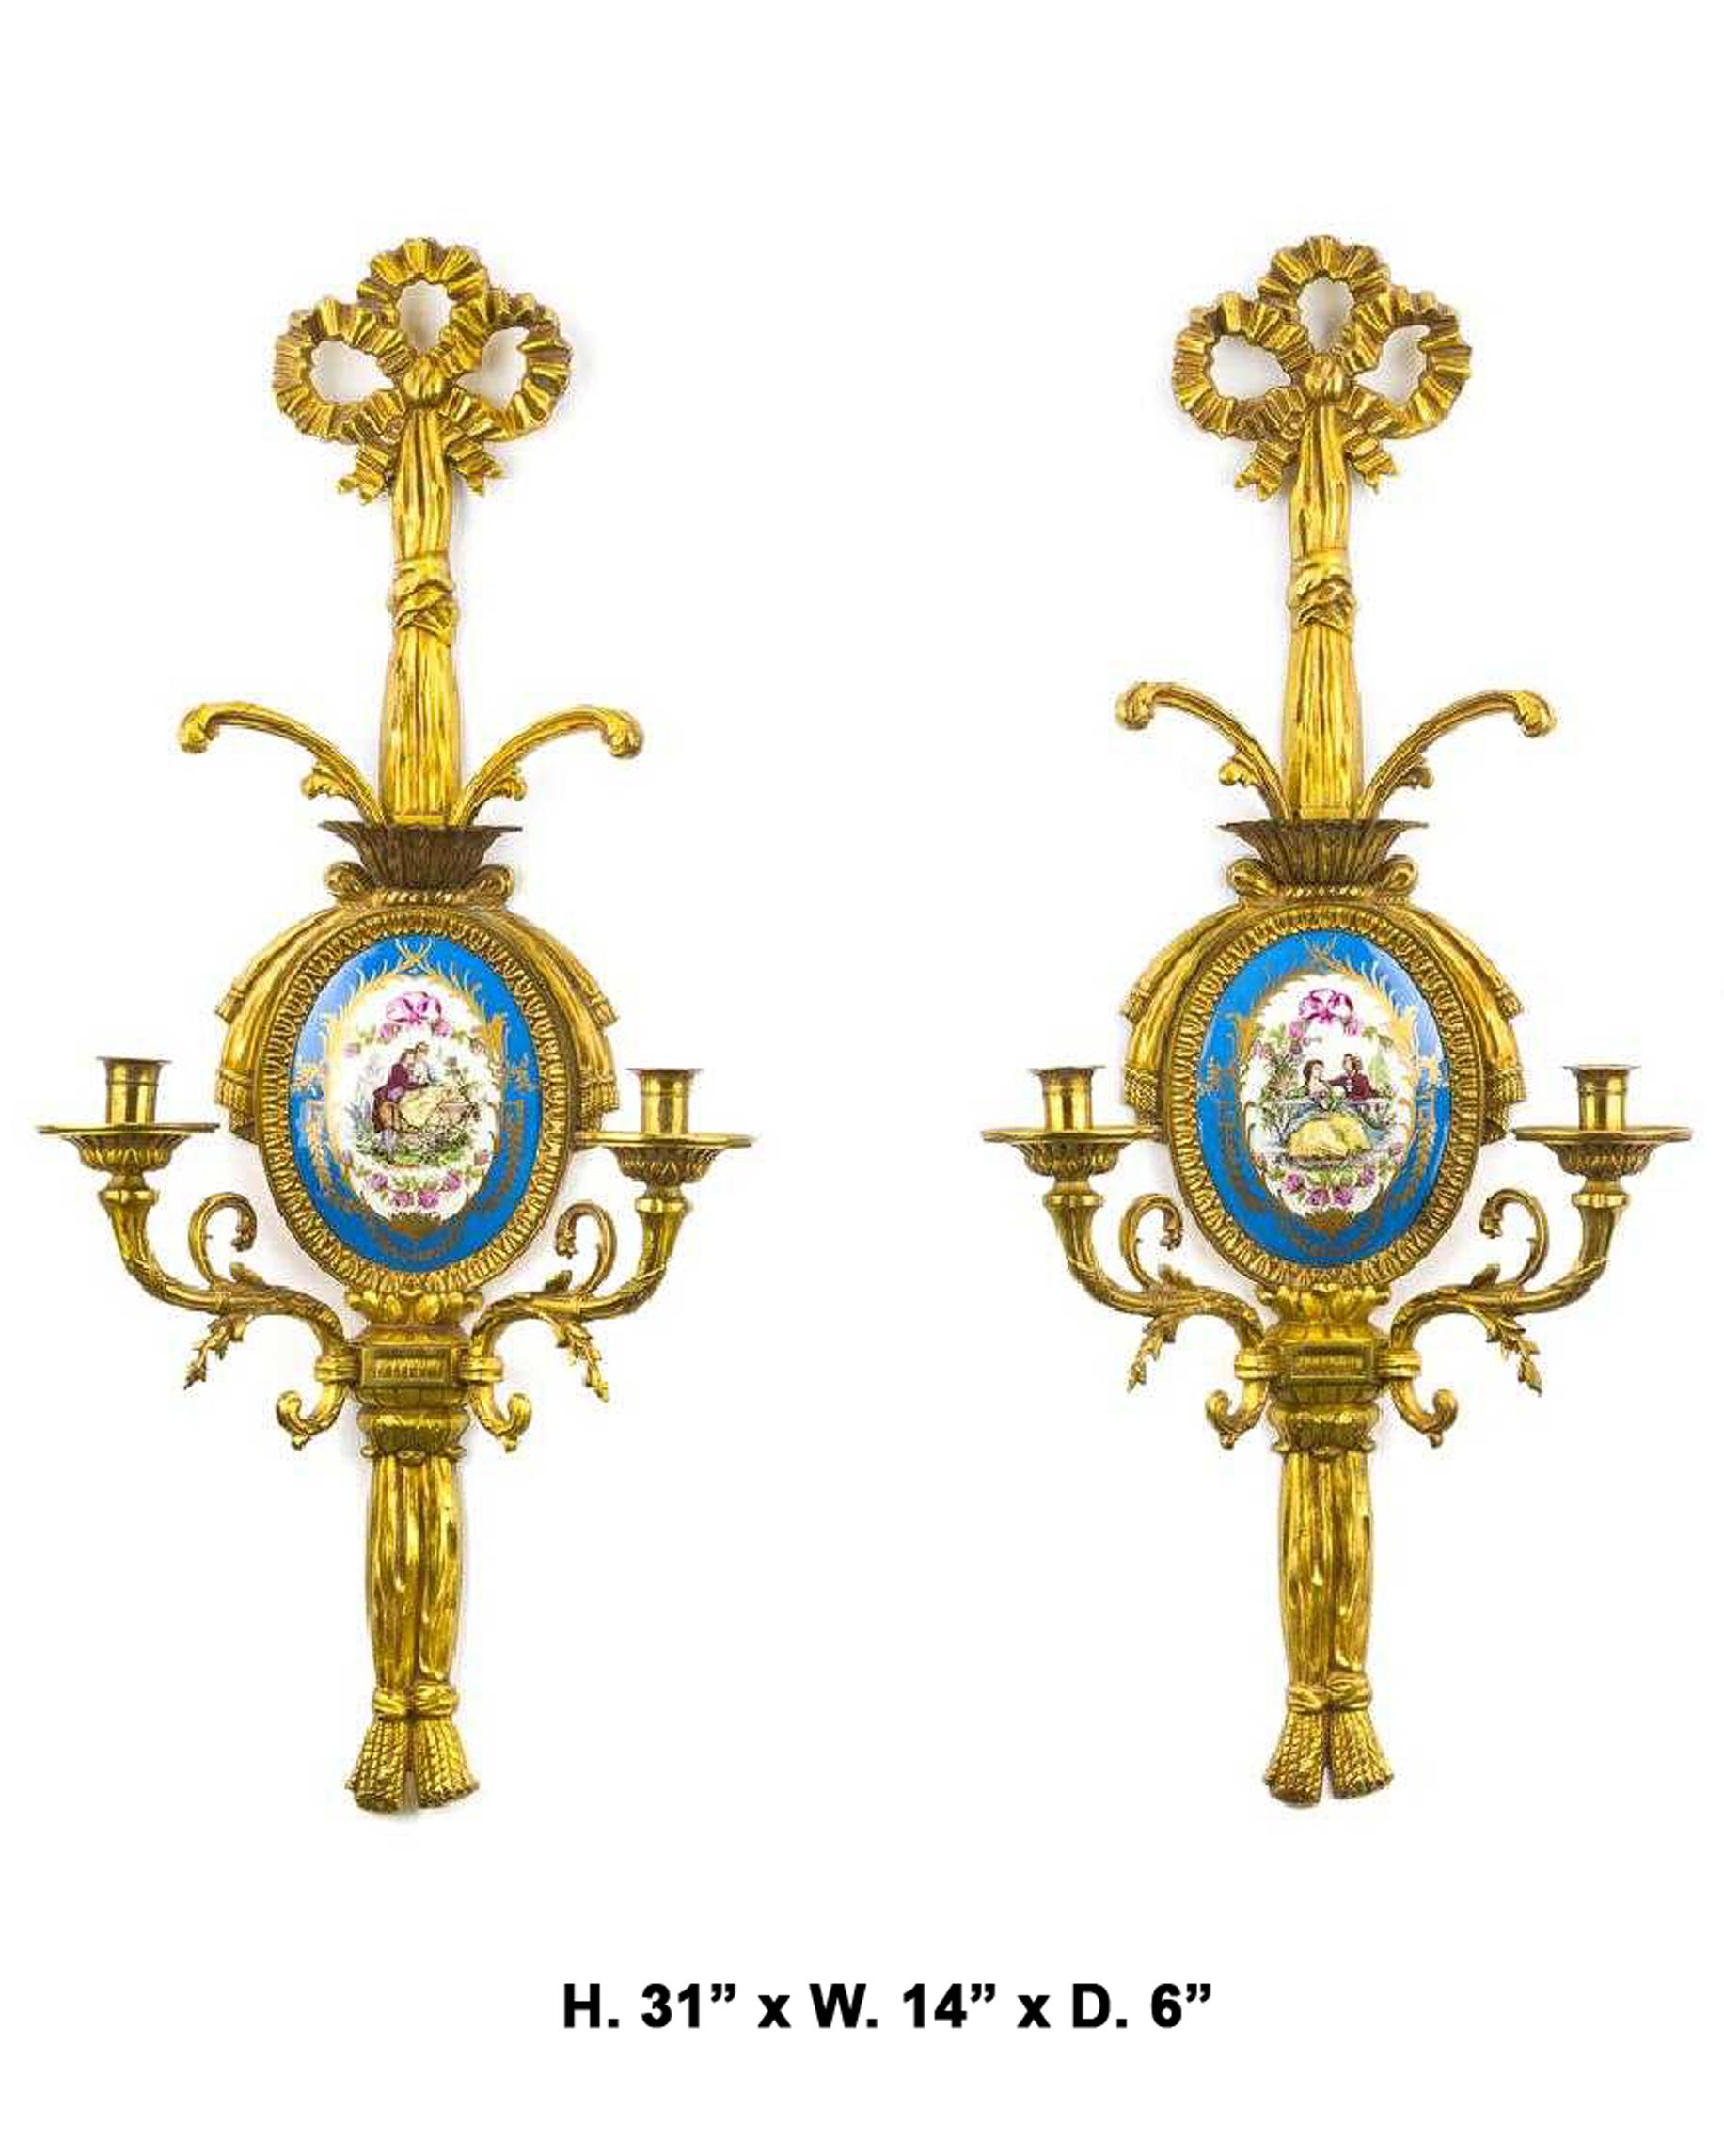 Imposing pair of French Louis XVI style gilt bronze and oval Sevres plaques two-light sconces, 20th century.
The sconces are surmounted by gilt bronze ribbons over a signed oval celeste bleu Sevres plaque depicting romantic scenes, above two